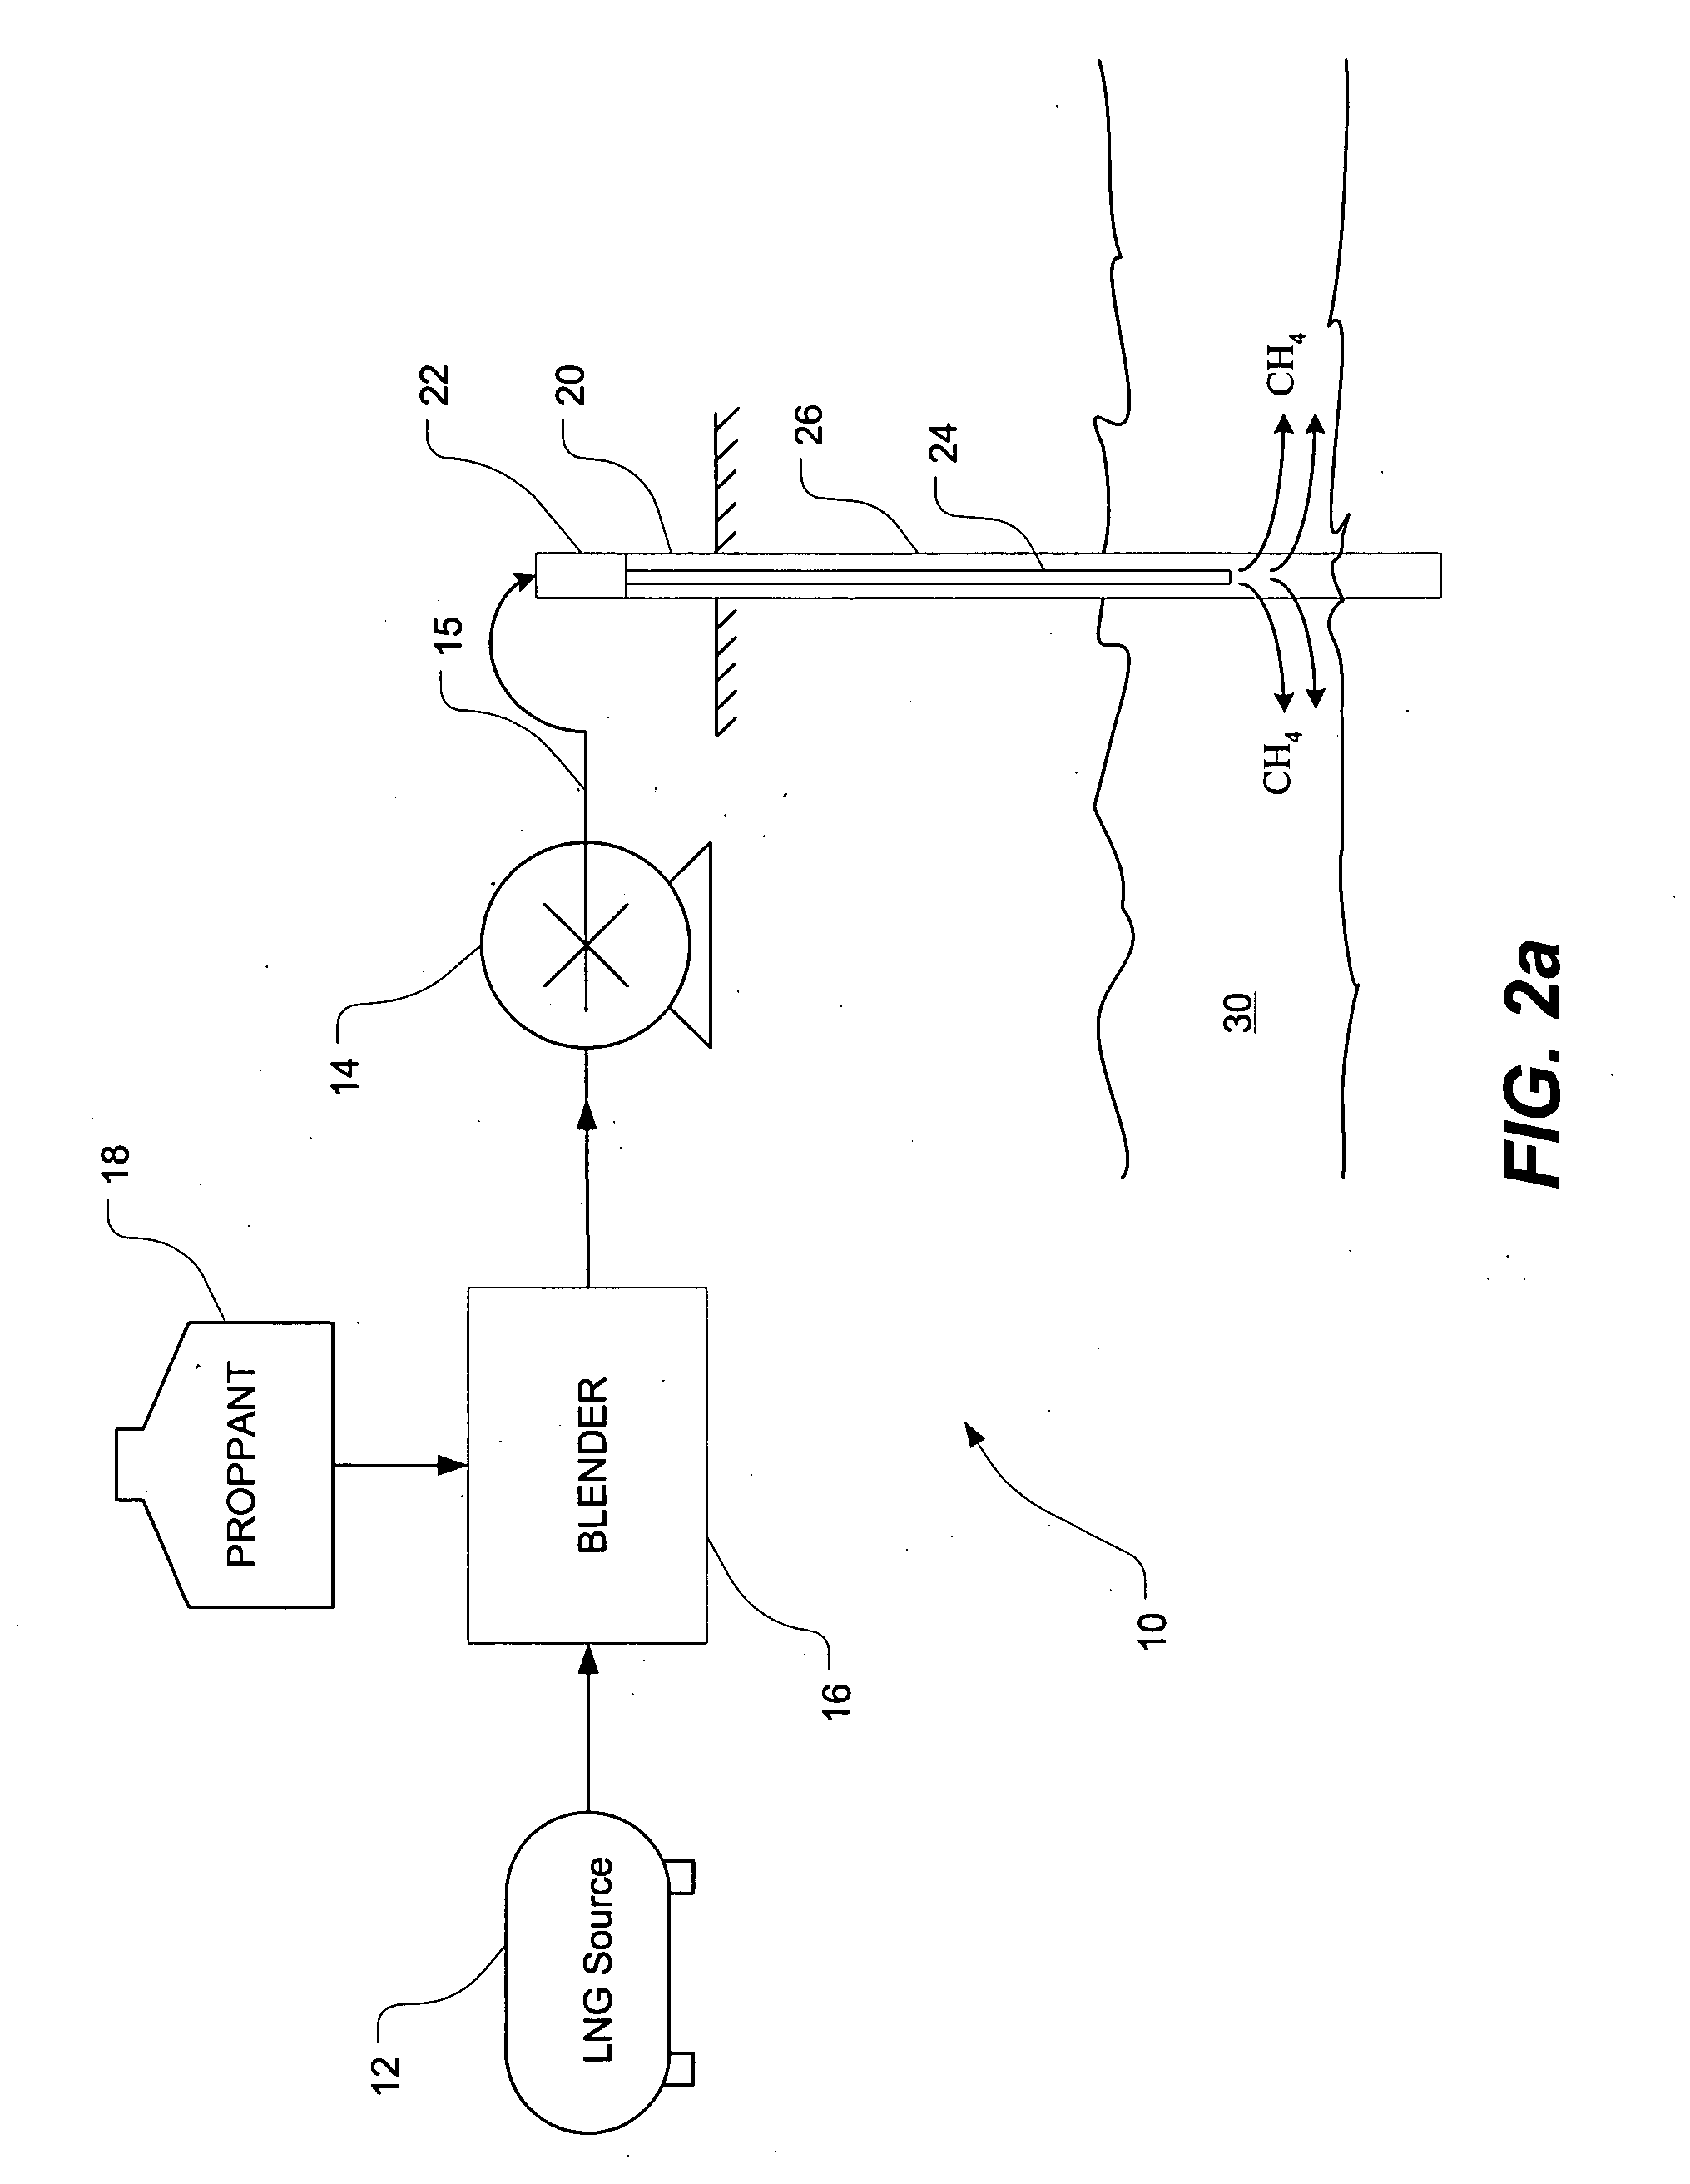 Method and apparatus for stimulating a subterranean formation using liquefied natural gas